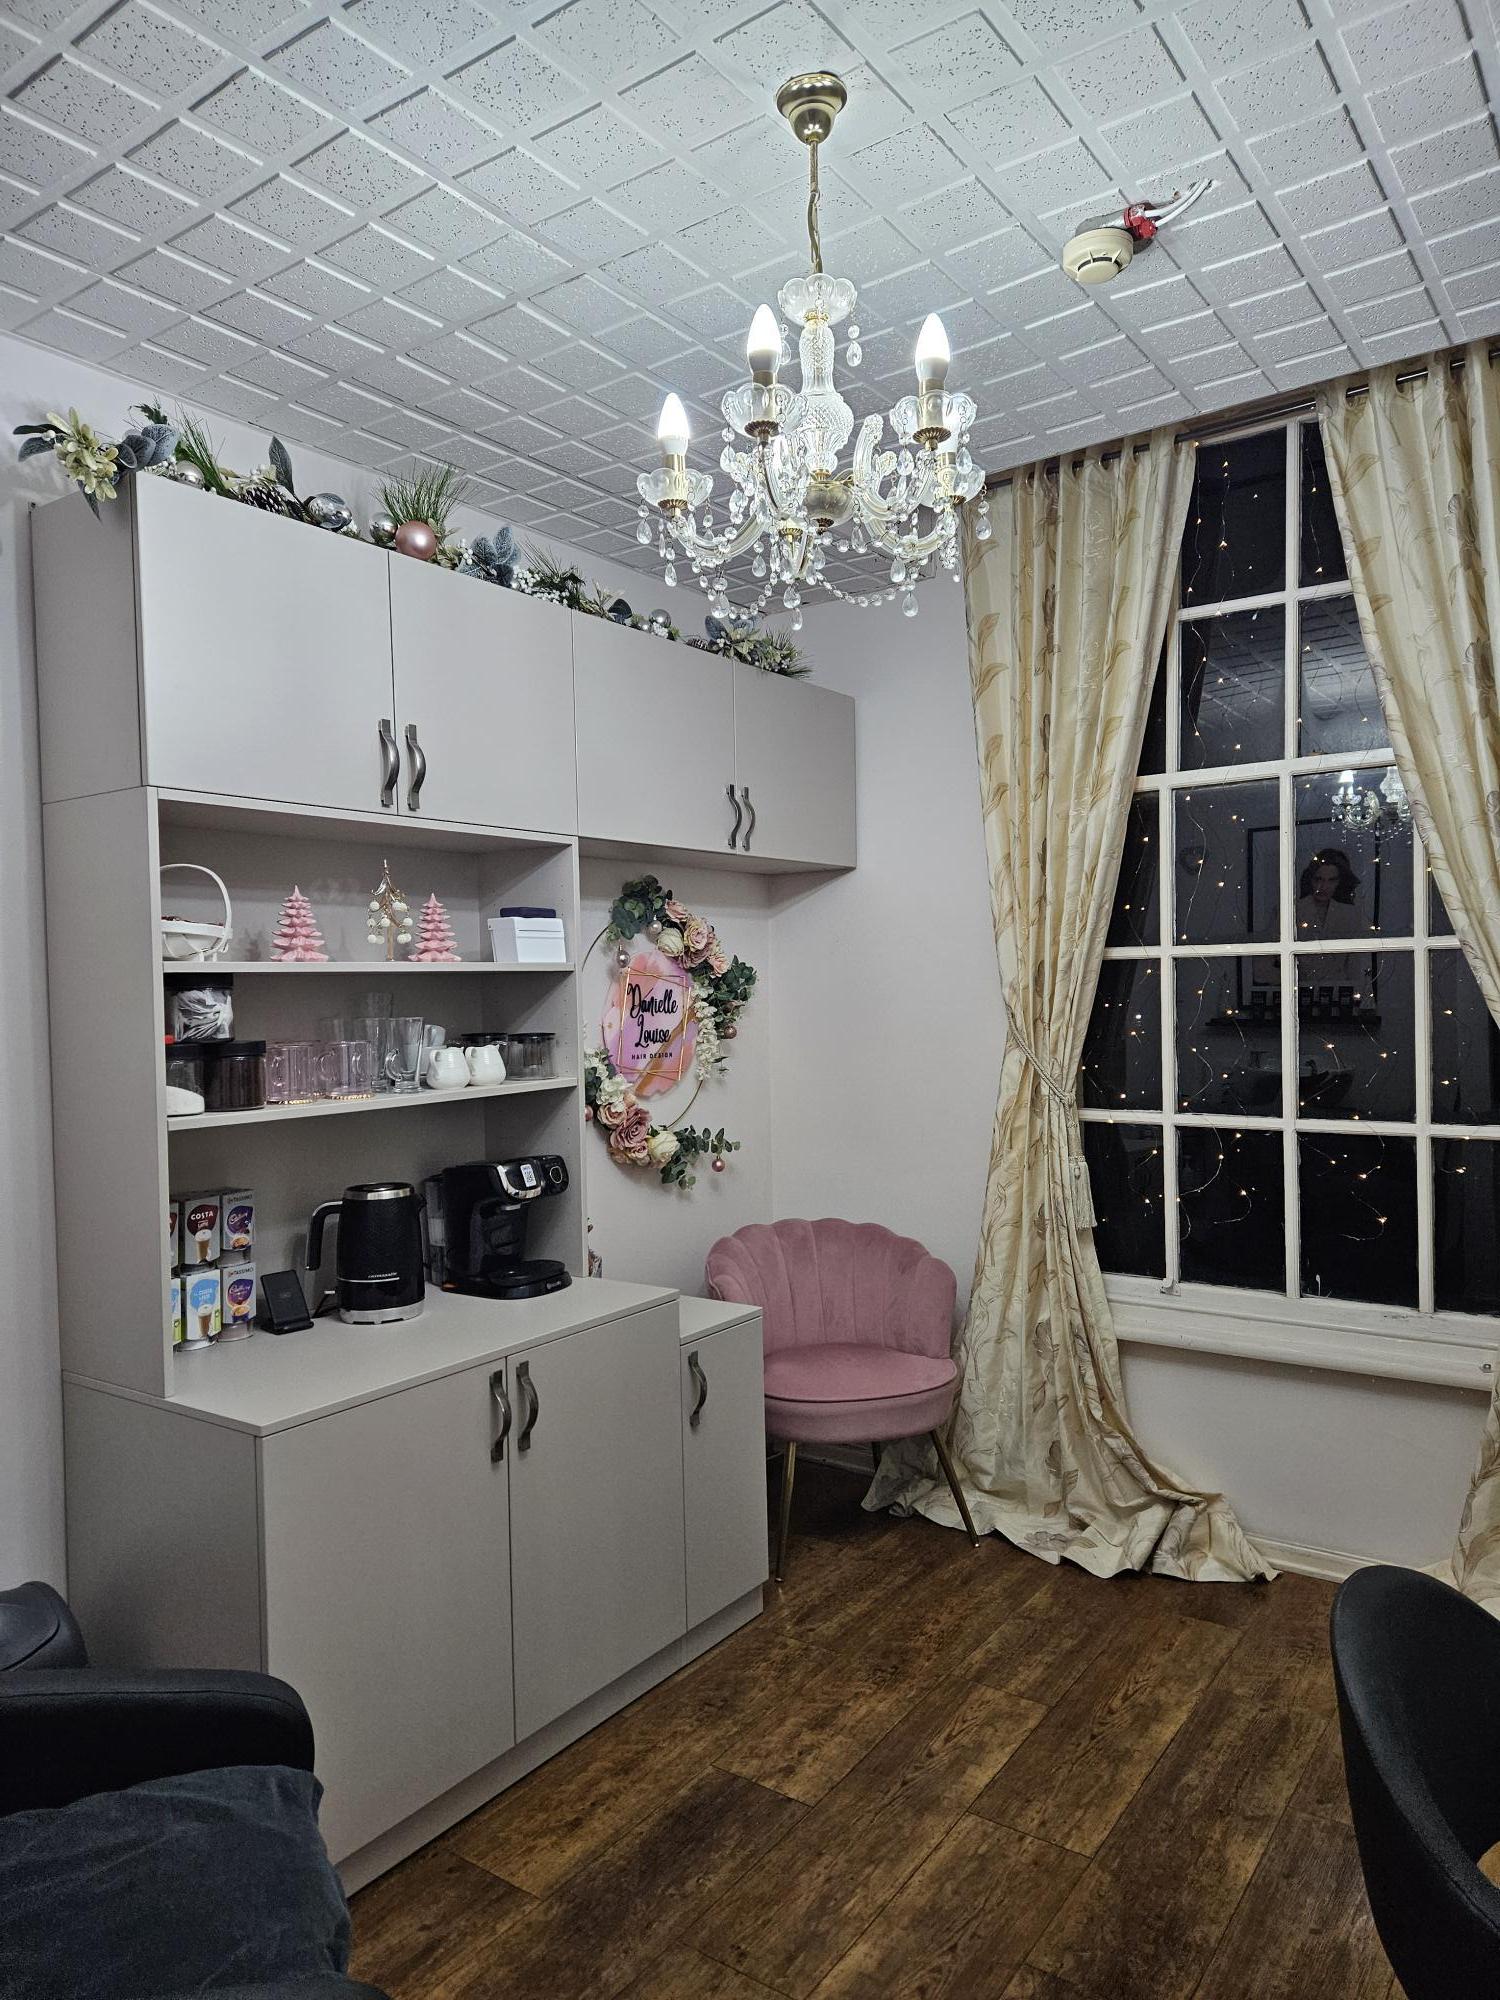 Danielle opened her boutique salon three years ago